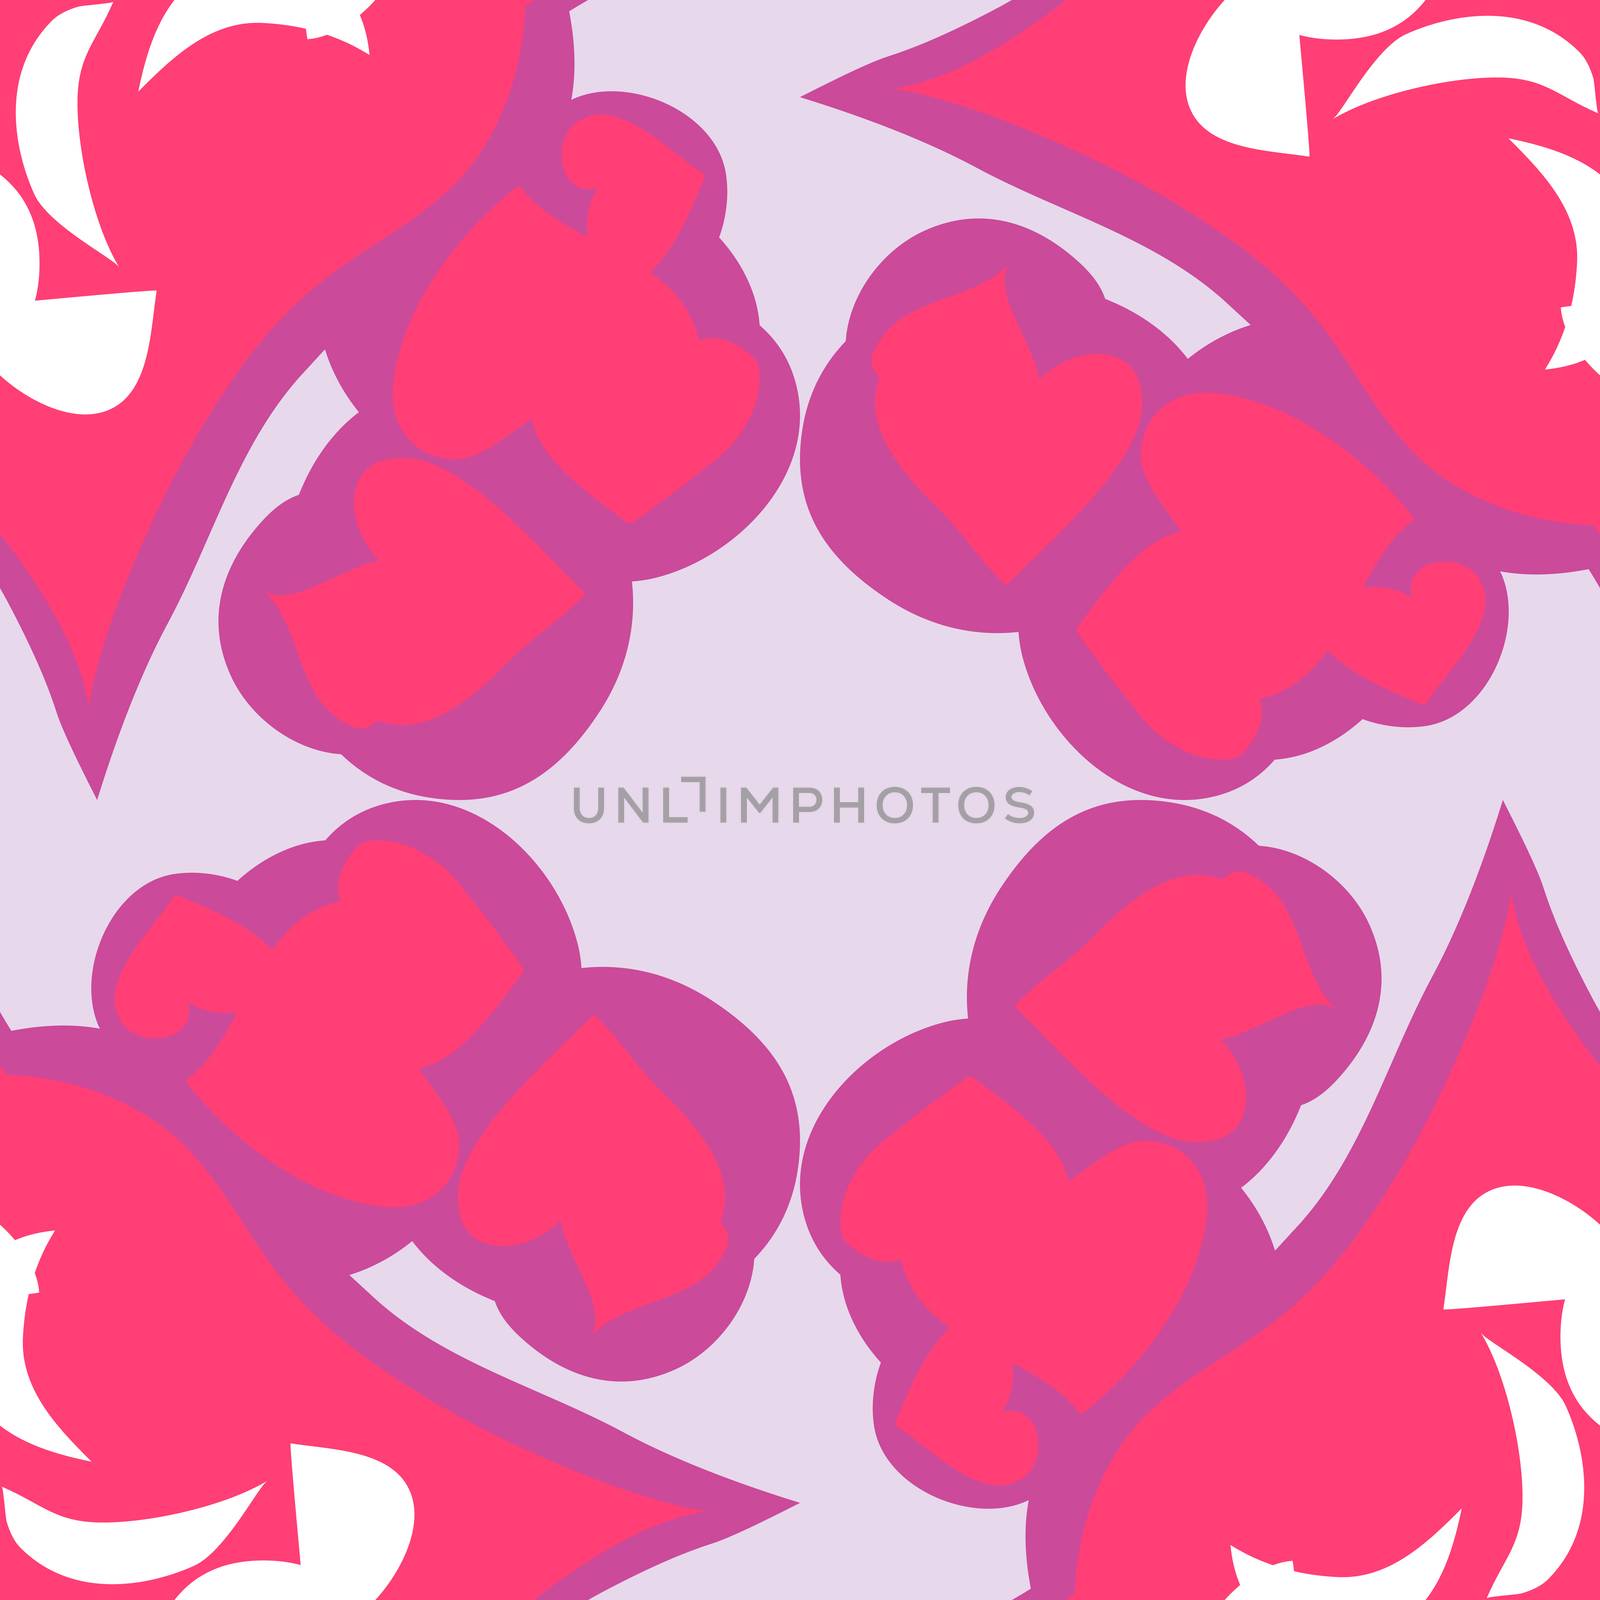 Rectangular Pattern of Pink Shapes by TheBlackRhino